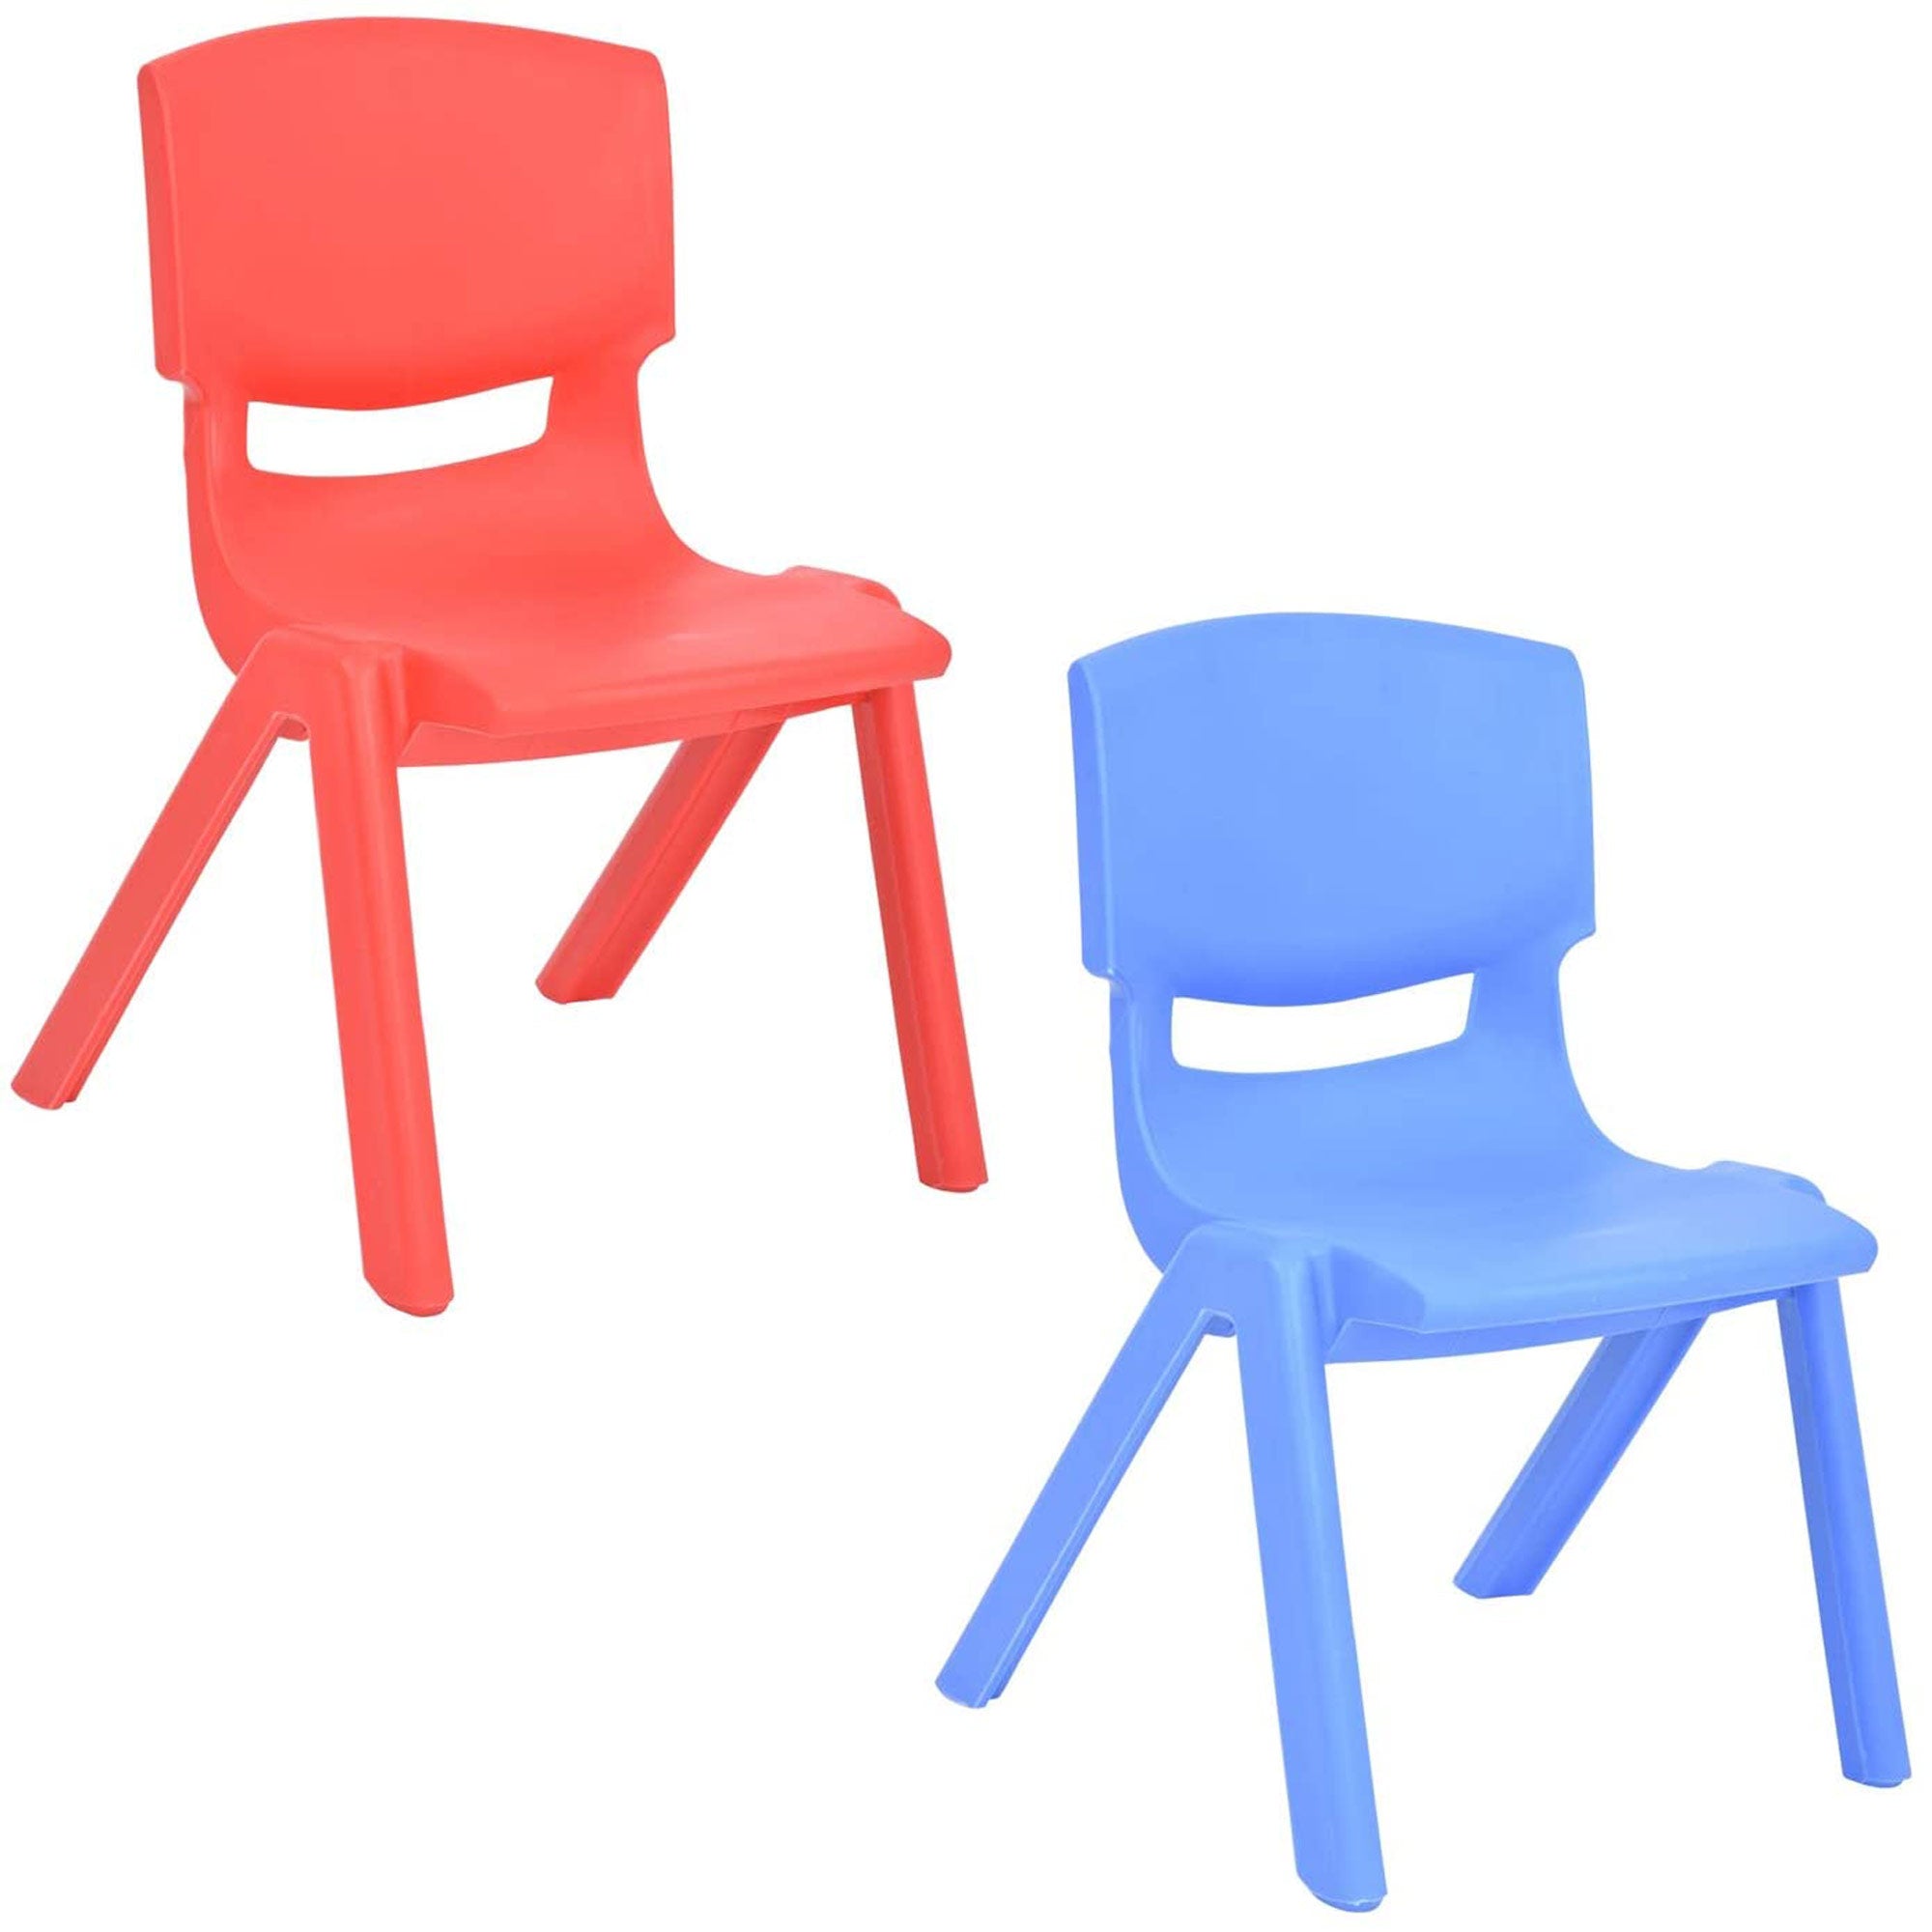 JOON Stackable Plastic Kids Learning Chairs Set, Red-Blue